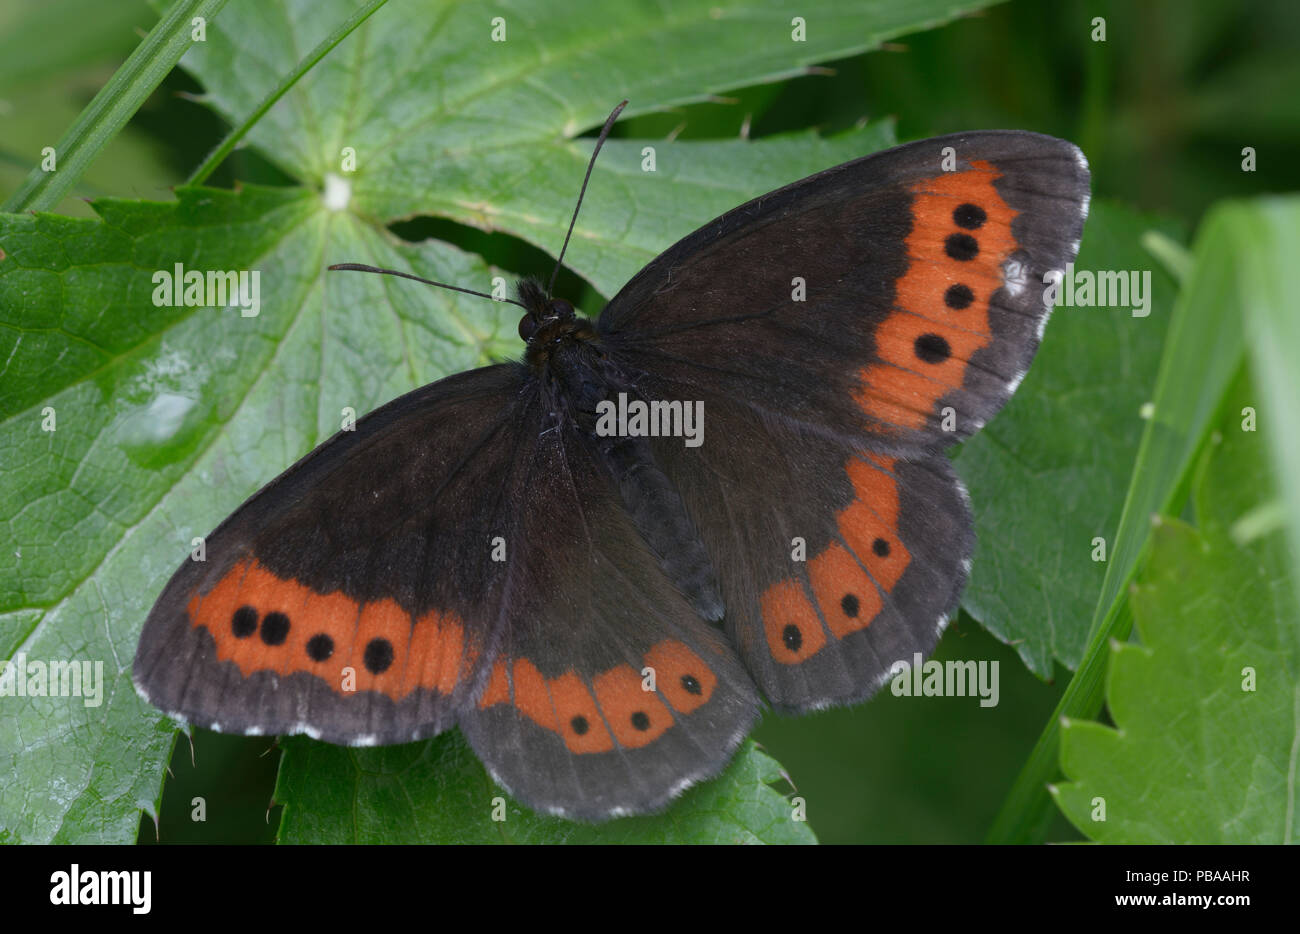 Black butterfly with red-spotted wings sitting on a green leaf Stock Photo